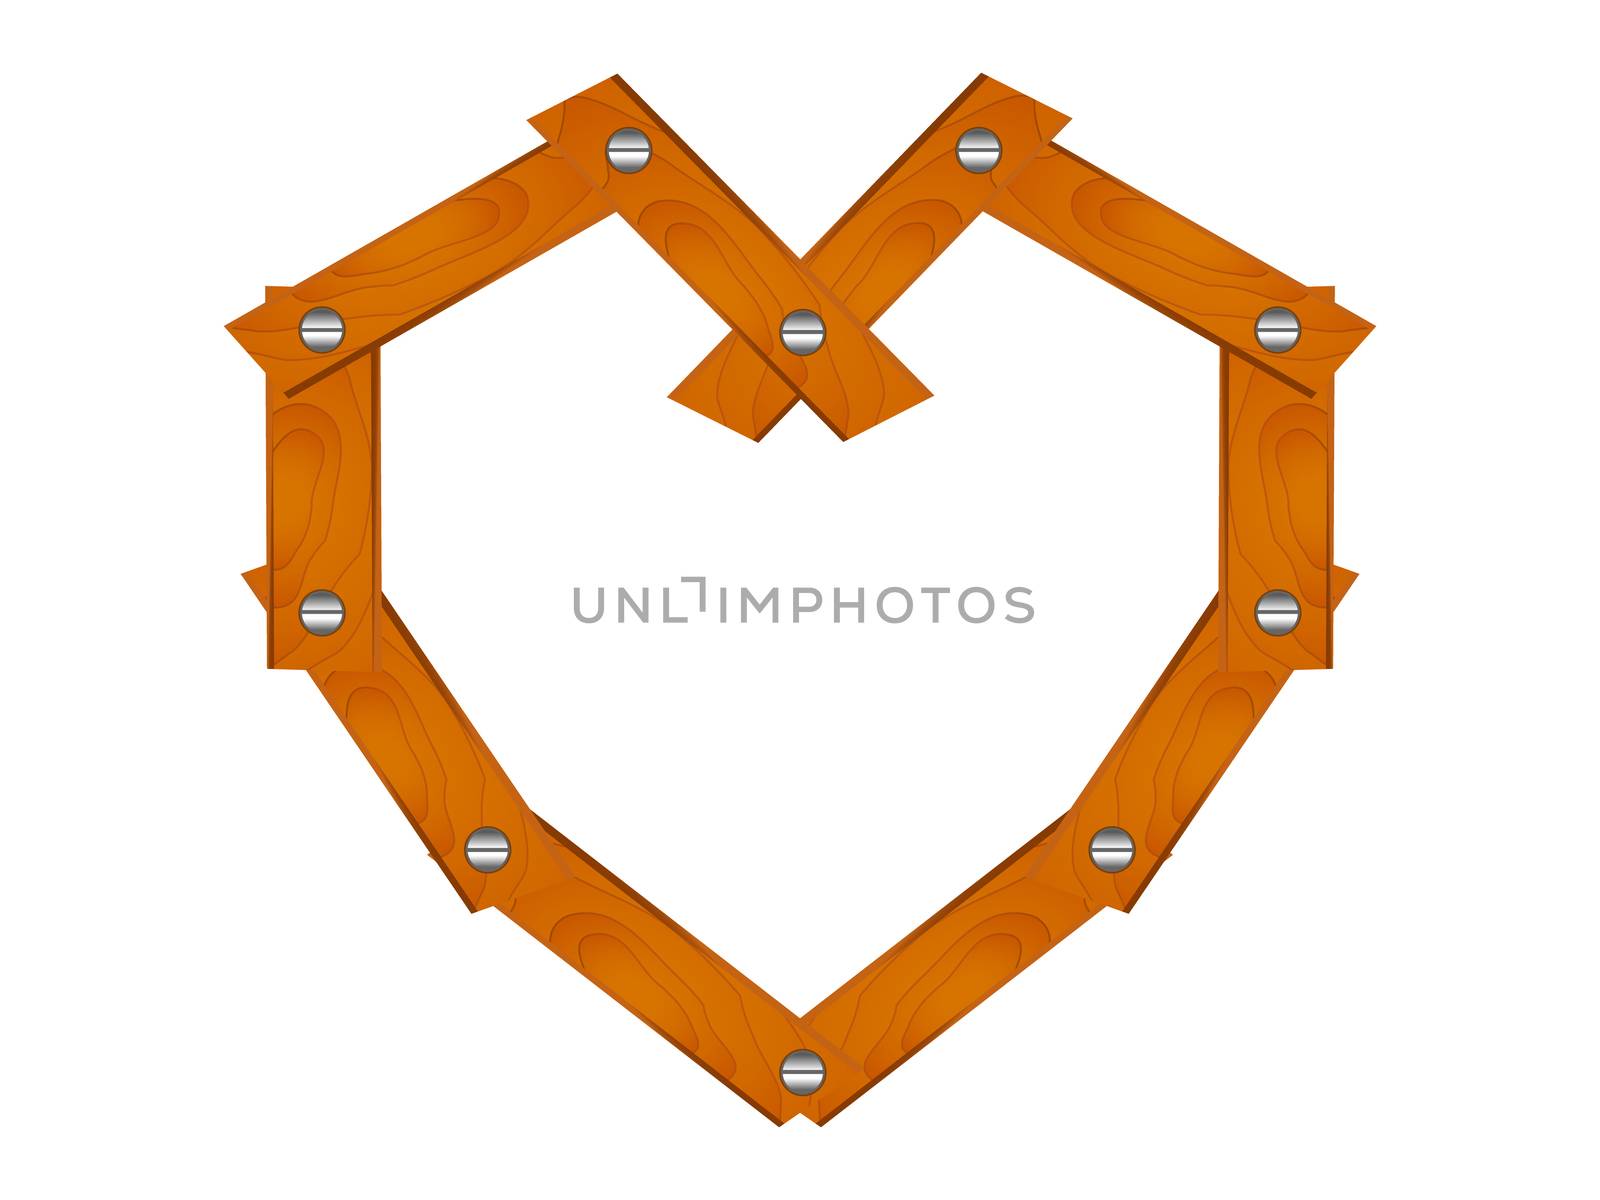 Heart made of wooden planks fixed with nails. Build your love. Wood wedding symbol